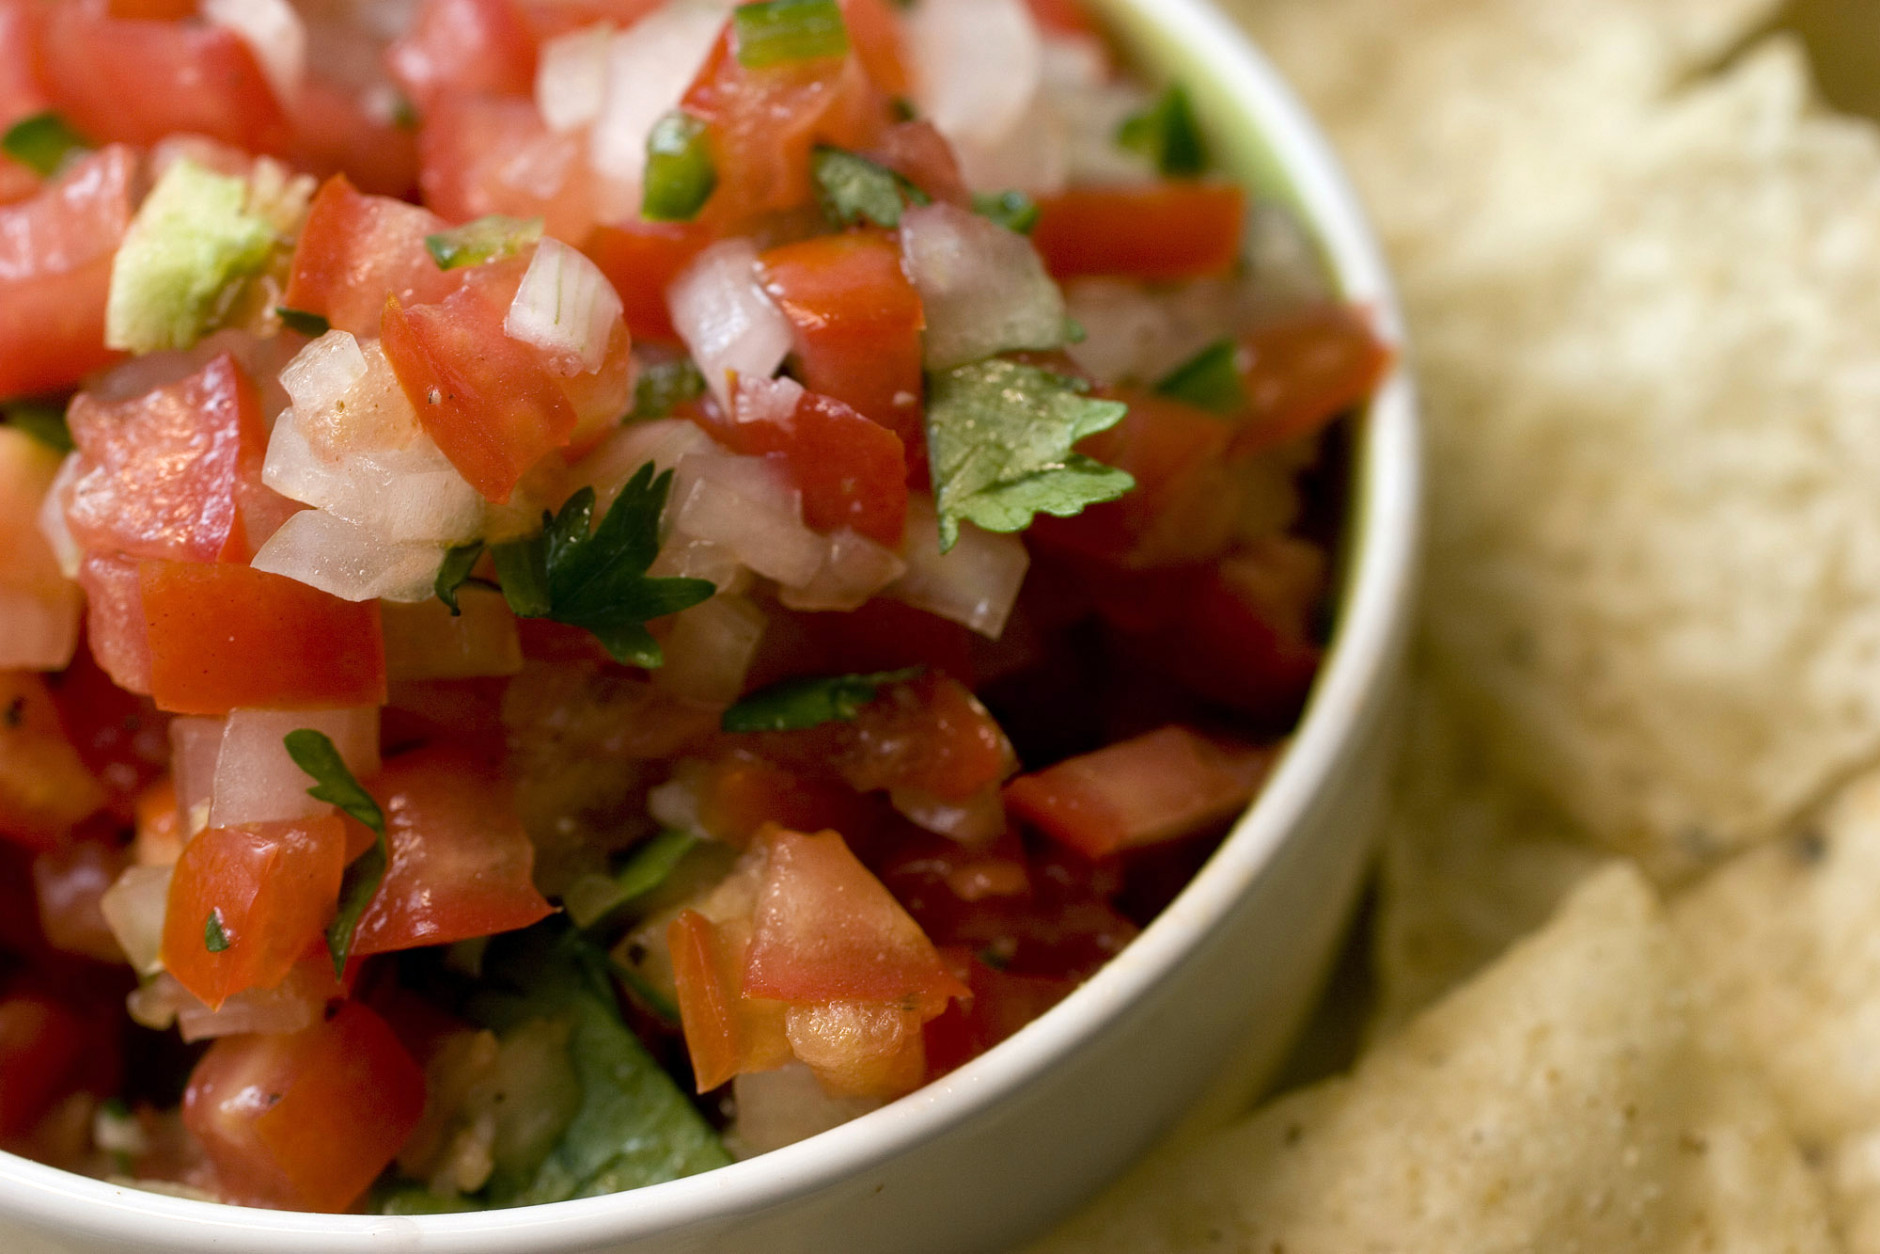 ** FOR USE WITH AP LIFESTYLES ** Mexican-style Tomato Salsa, shown in this July 9, 2007 photo, uses a few classic ingredients, is quick to make and best an hour or two after making.  (AP Photo/Larry Crowe)